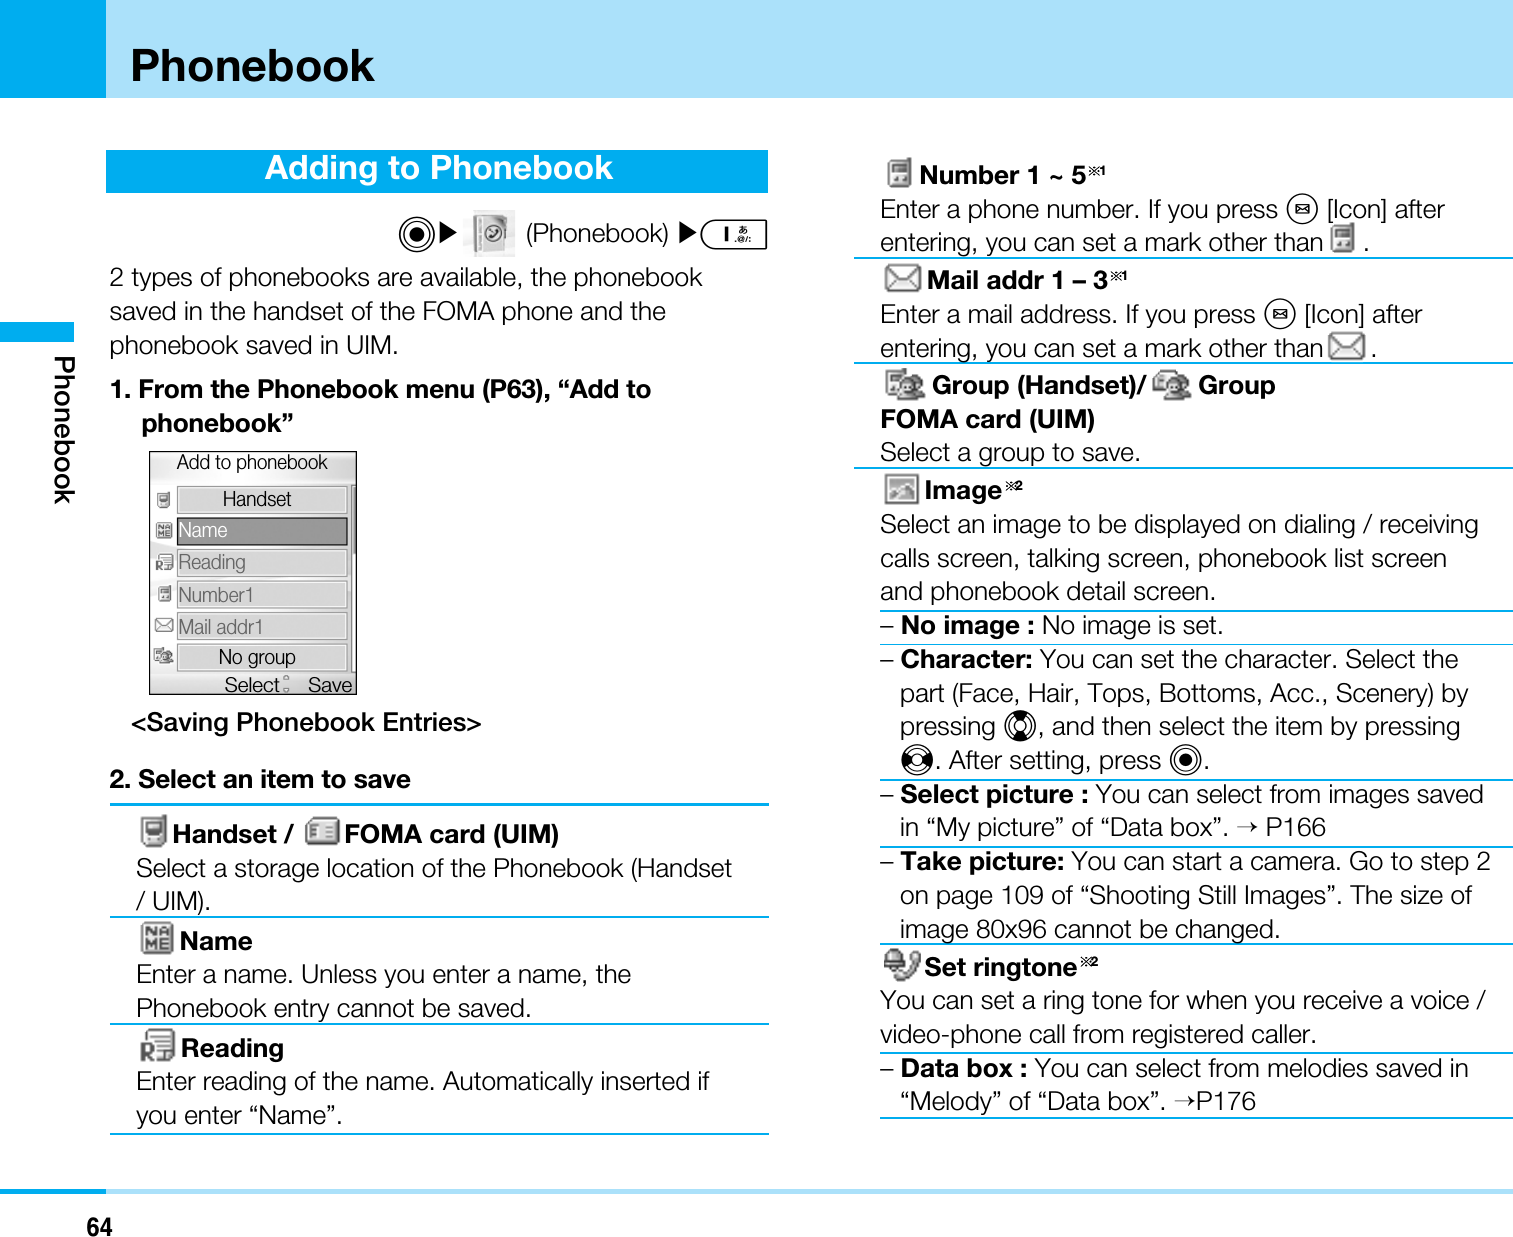 64PhonebookAdding to PhonebookC](Phonebook) ]12 types of phonebooks are available, the phonebooksaved in the handset of the FOMA phone and thephonebook saved in UIM.1. From the Phonebook menu (P63), “Add tophonebook”&lt;Saving Phonebook Entries&gt;2. Select an item to saveHandset /  FOMA card (UIM)Select a storage location of the Phonebook (Handset/ UIM).NameEnter a name. Unless you enter a name, thePhonebook entry cannot be saved.ReadingEnter reading of the name. Automatically inserted ifyou enter “Name”.Number 1 ~ 5 1Enter a phone number. If you press M[Icon] afterentering, you can set a mark other than .Mail addr 1 – 3 1Enter a mail address. If you press M[Icon] afterentering, you can set a mark other than .Group (Handset)/ GroupFOMA card (UIM)Select a group to save.Image 2Select an image to be displayed on dialing / receivingcalls screen, talking screen, phonebook list screenand phonebook detail screen.–No image : No image is set.–Character: You can set the character. Select thepart (Face, Hair, Tops, Bottoms, Acc., Scenery) bypressing H, and then select the item by pressingJ. After setting, press C.–Select picture : You can select from images savedin “My picture” of “Data box”. &gt;P166–Take picture: You can start a camera. Go to step 2on page 109 of “Shooting Still Images”. The size ofimage 80x96 cannot be changed.Set ringtone 2You can set a ring tone for when you receive a voice /video-phone call from registered caller.–Data box : You can select from melodies saved in“Melody” of “Data box”. &gt;P176NameReadingNumber1Mail addr1No groupHandsetAdd to phonebookSaveSelectPhonebook